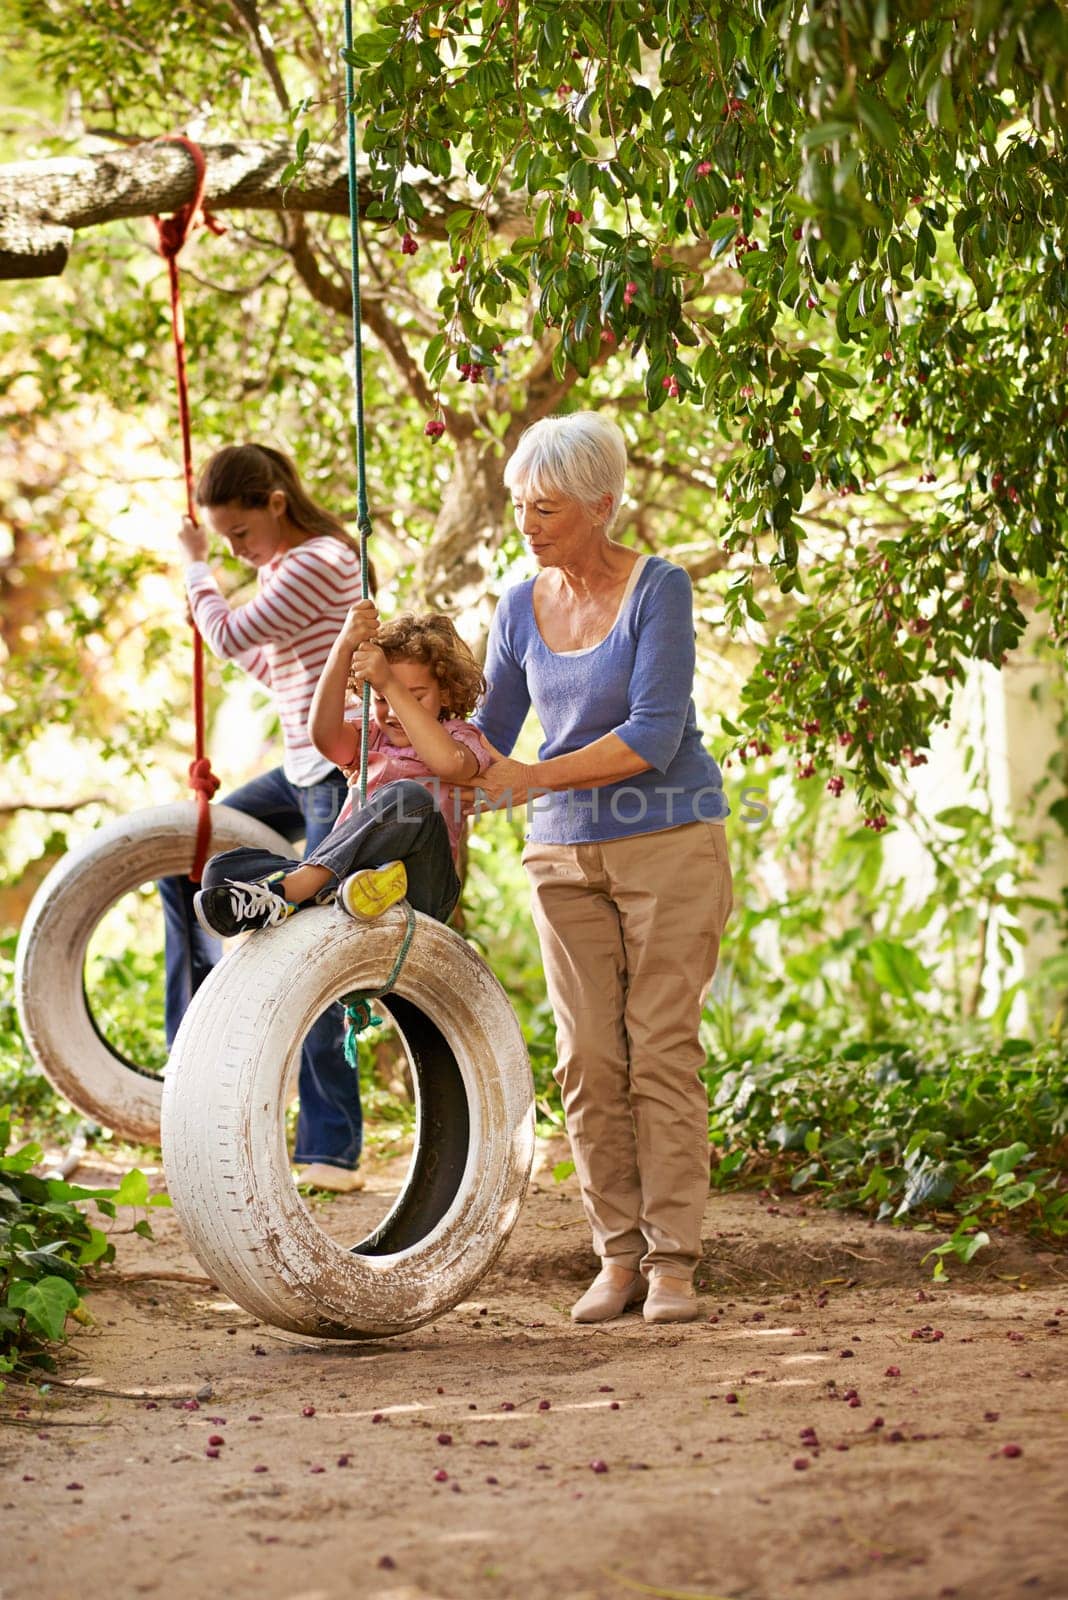 Senior woman, garden and grandma pushing her grandchildren on a tyre swing or holidays and having fun in summer. Excited, grandkids and elderly woman outdoors on jungle gym or on sunny day at a park.